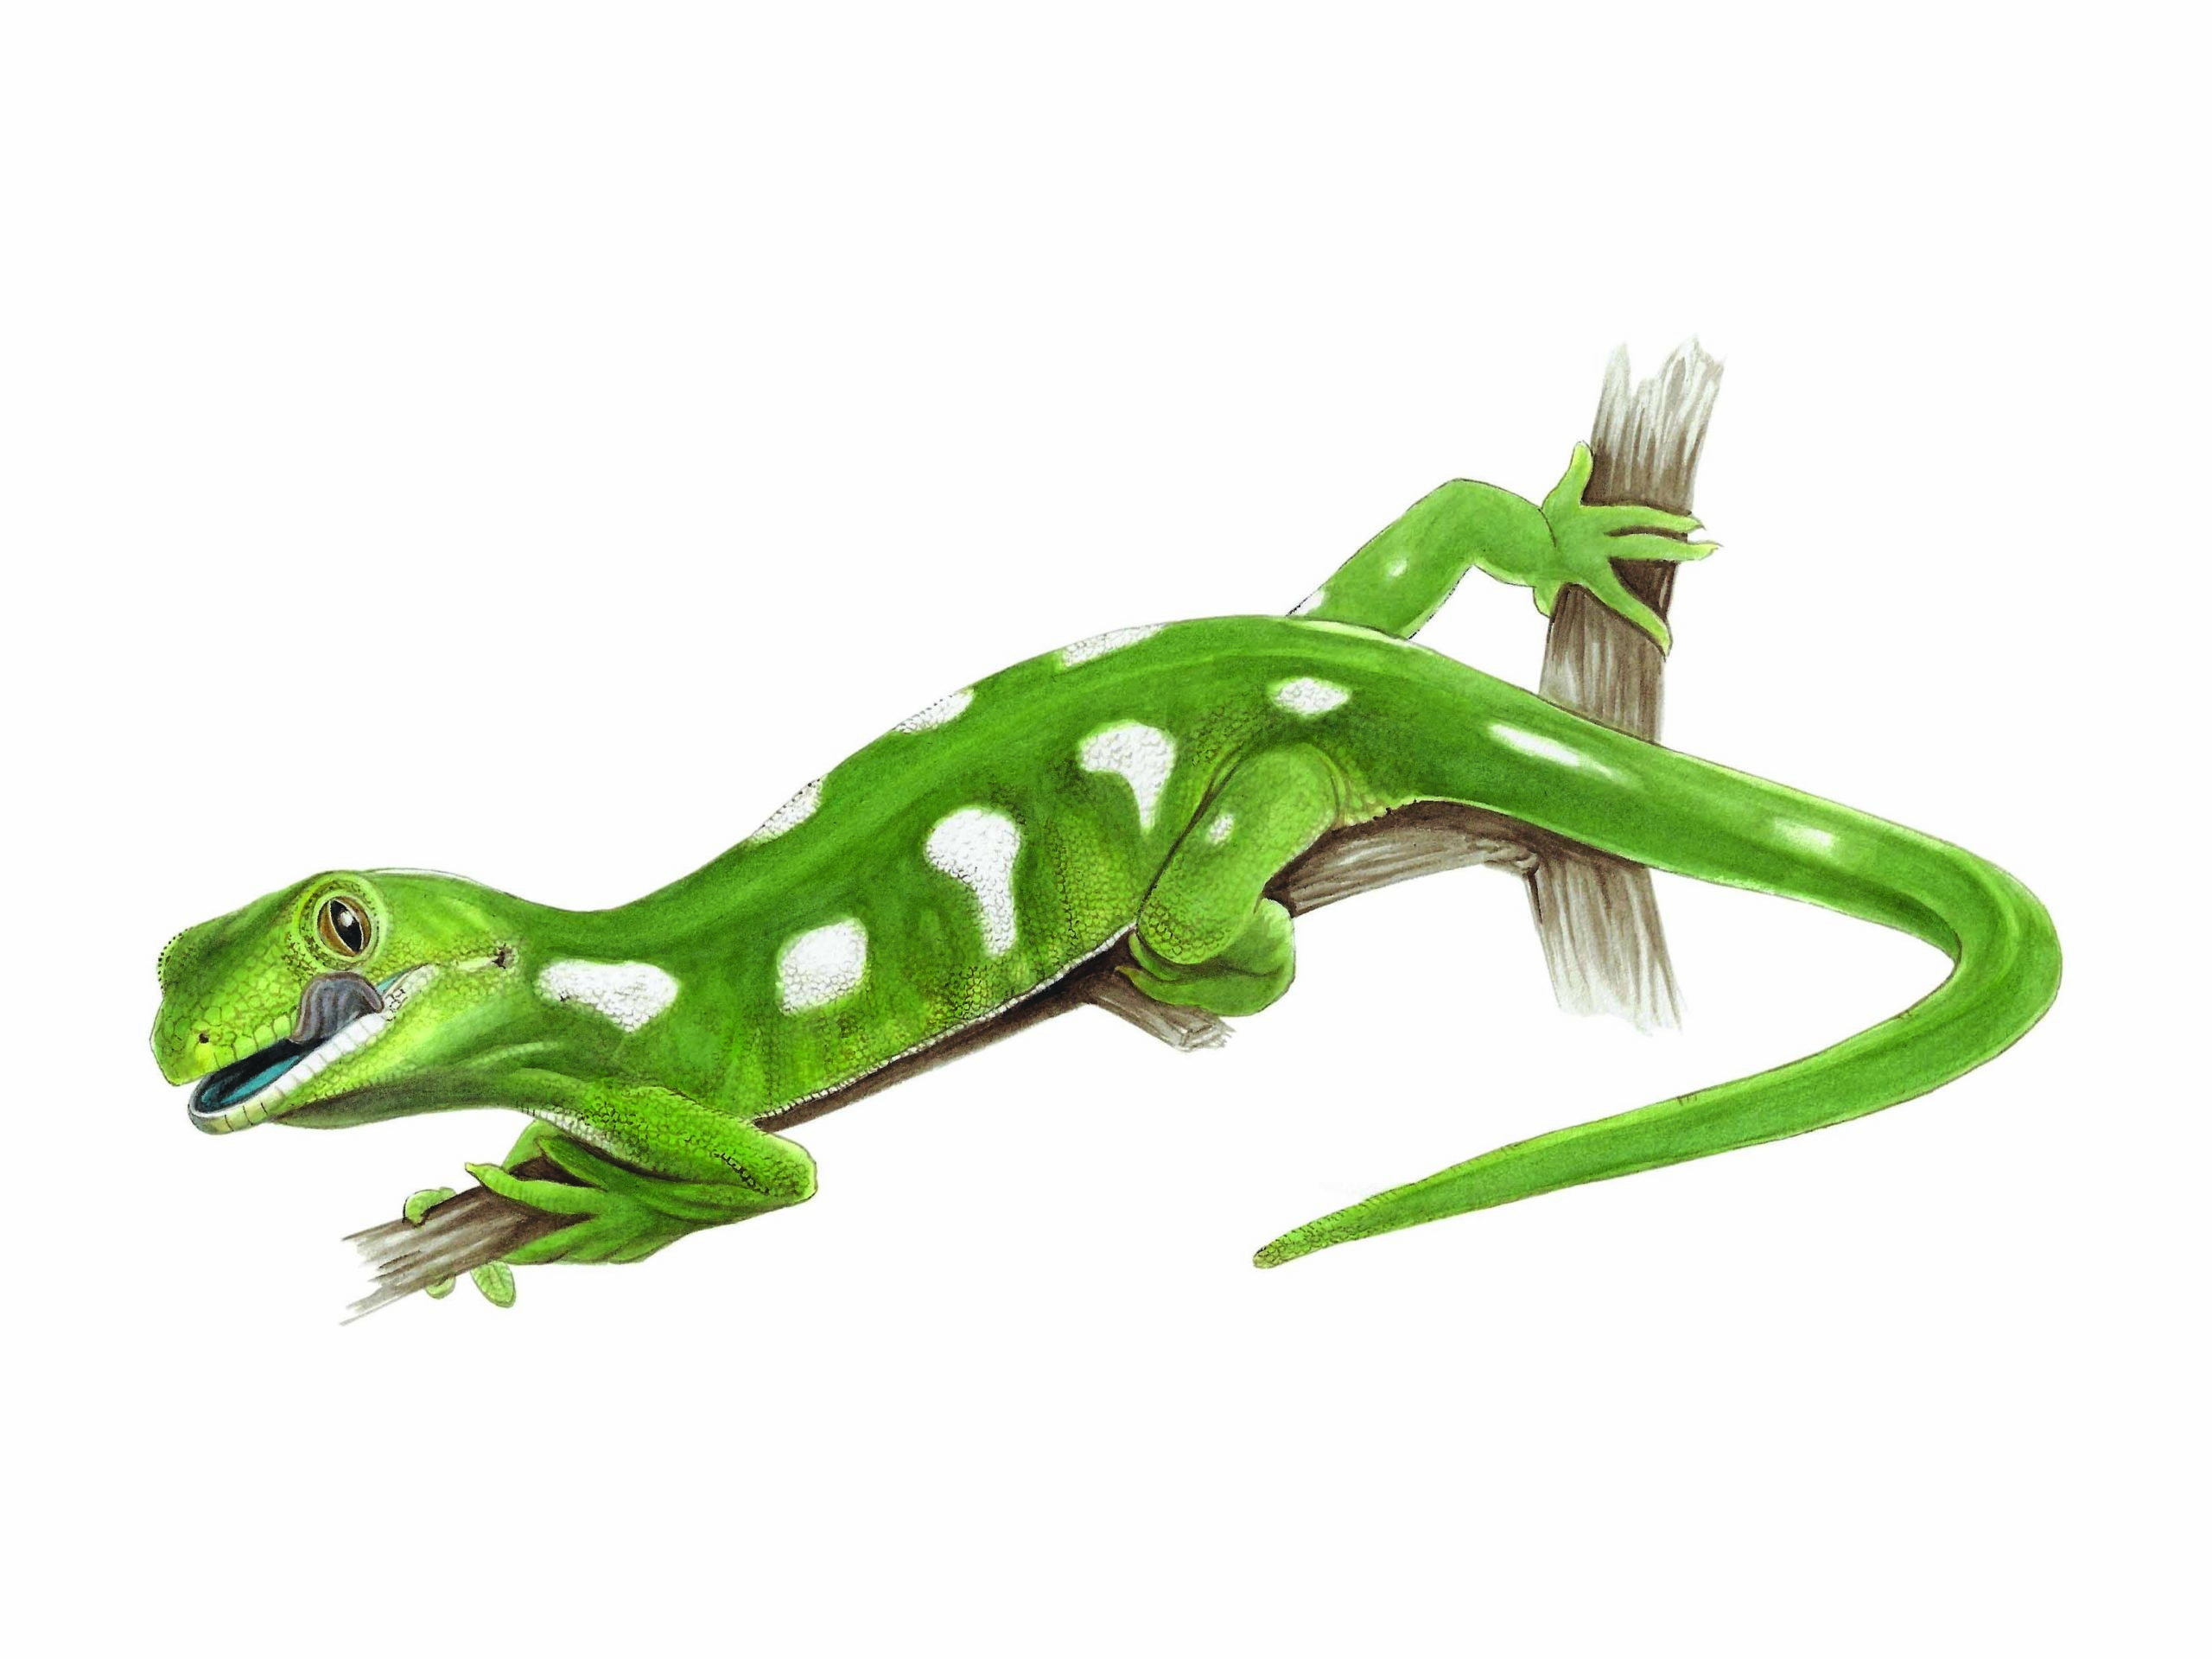 A painting of the elegant gecko